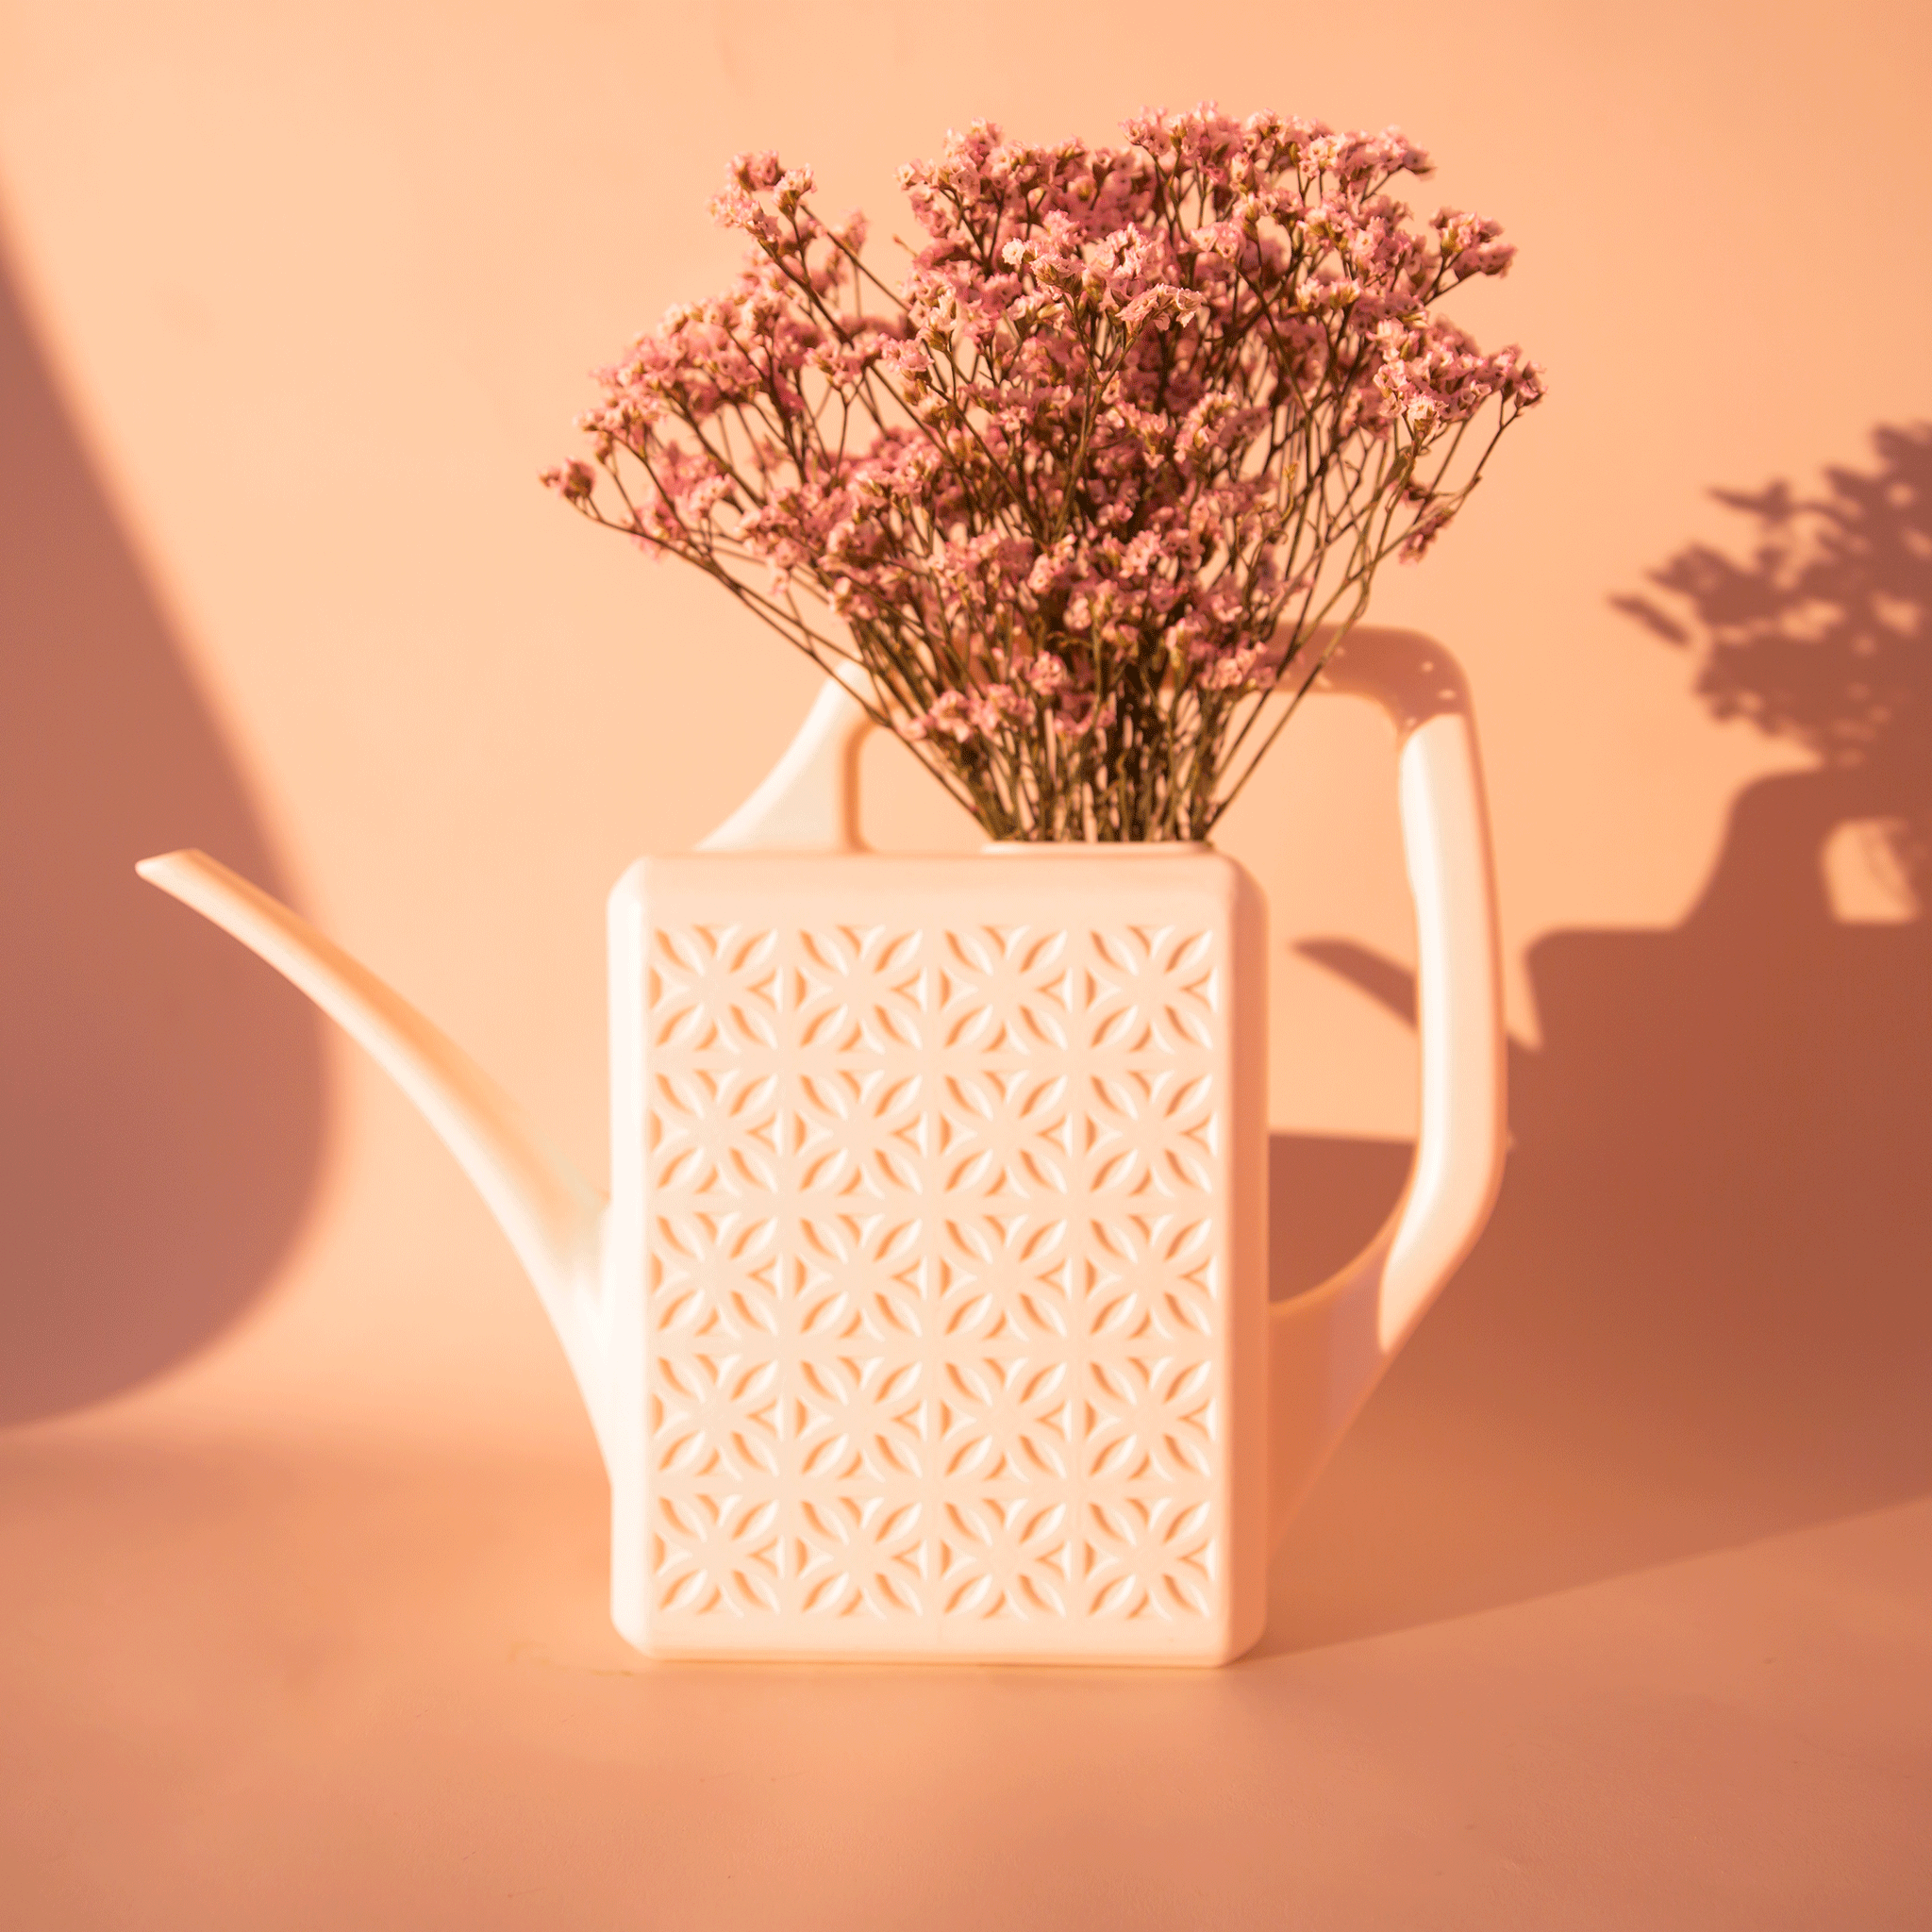 On a peachy background is a white plastic watering can with a long curved spout and a squared off handle along with a breeze block textured design on the sides of the watering can.